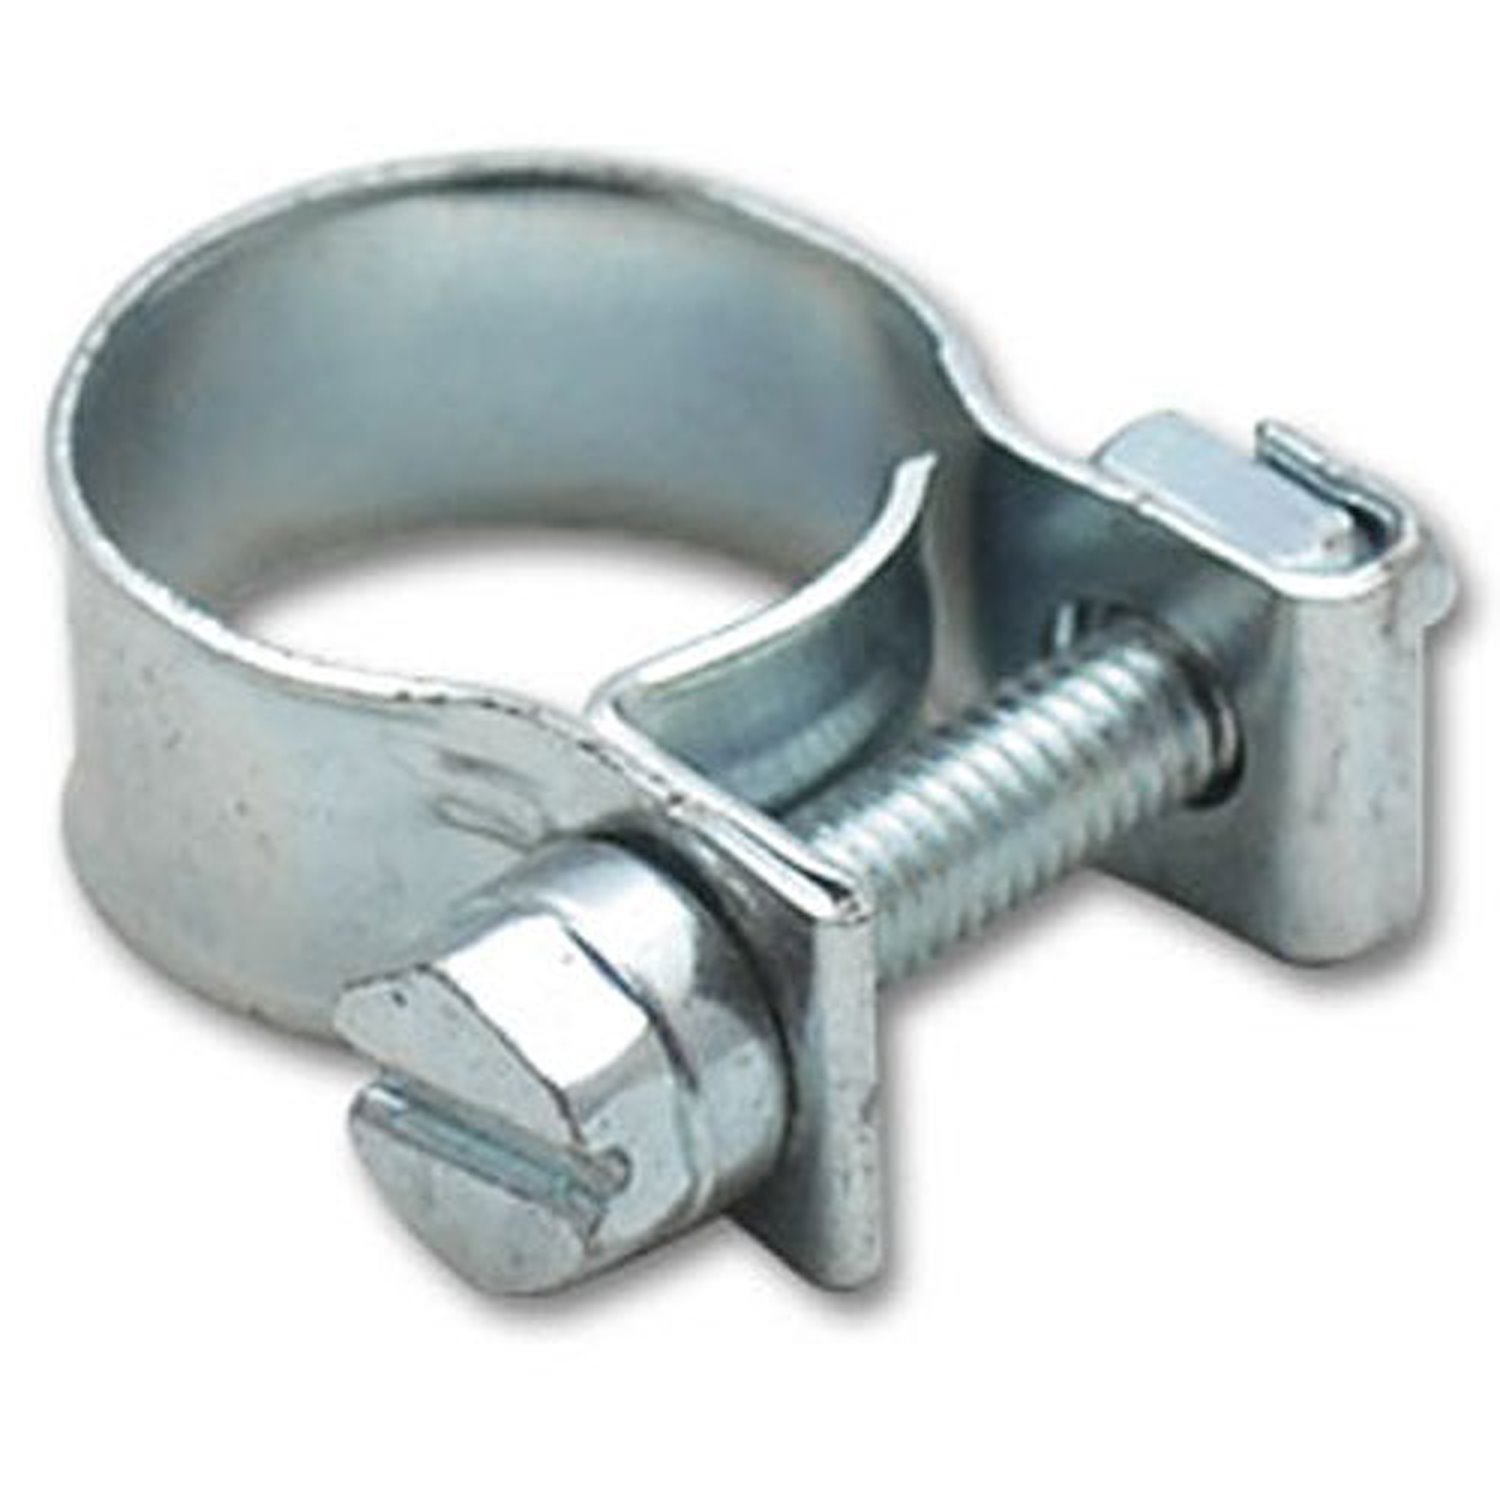 Fuel Injector Style Mini Hose Clamps 8mm - 10mm